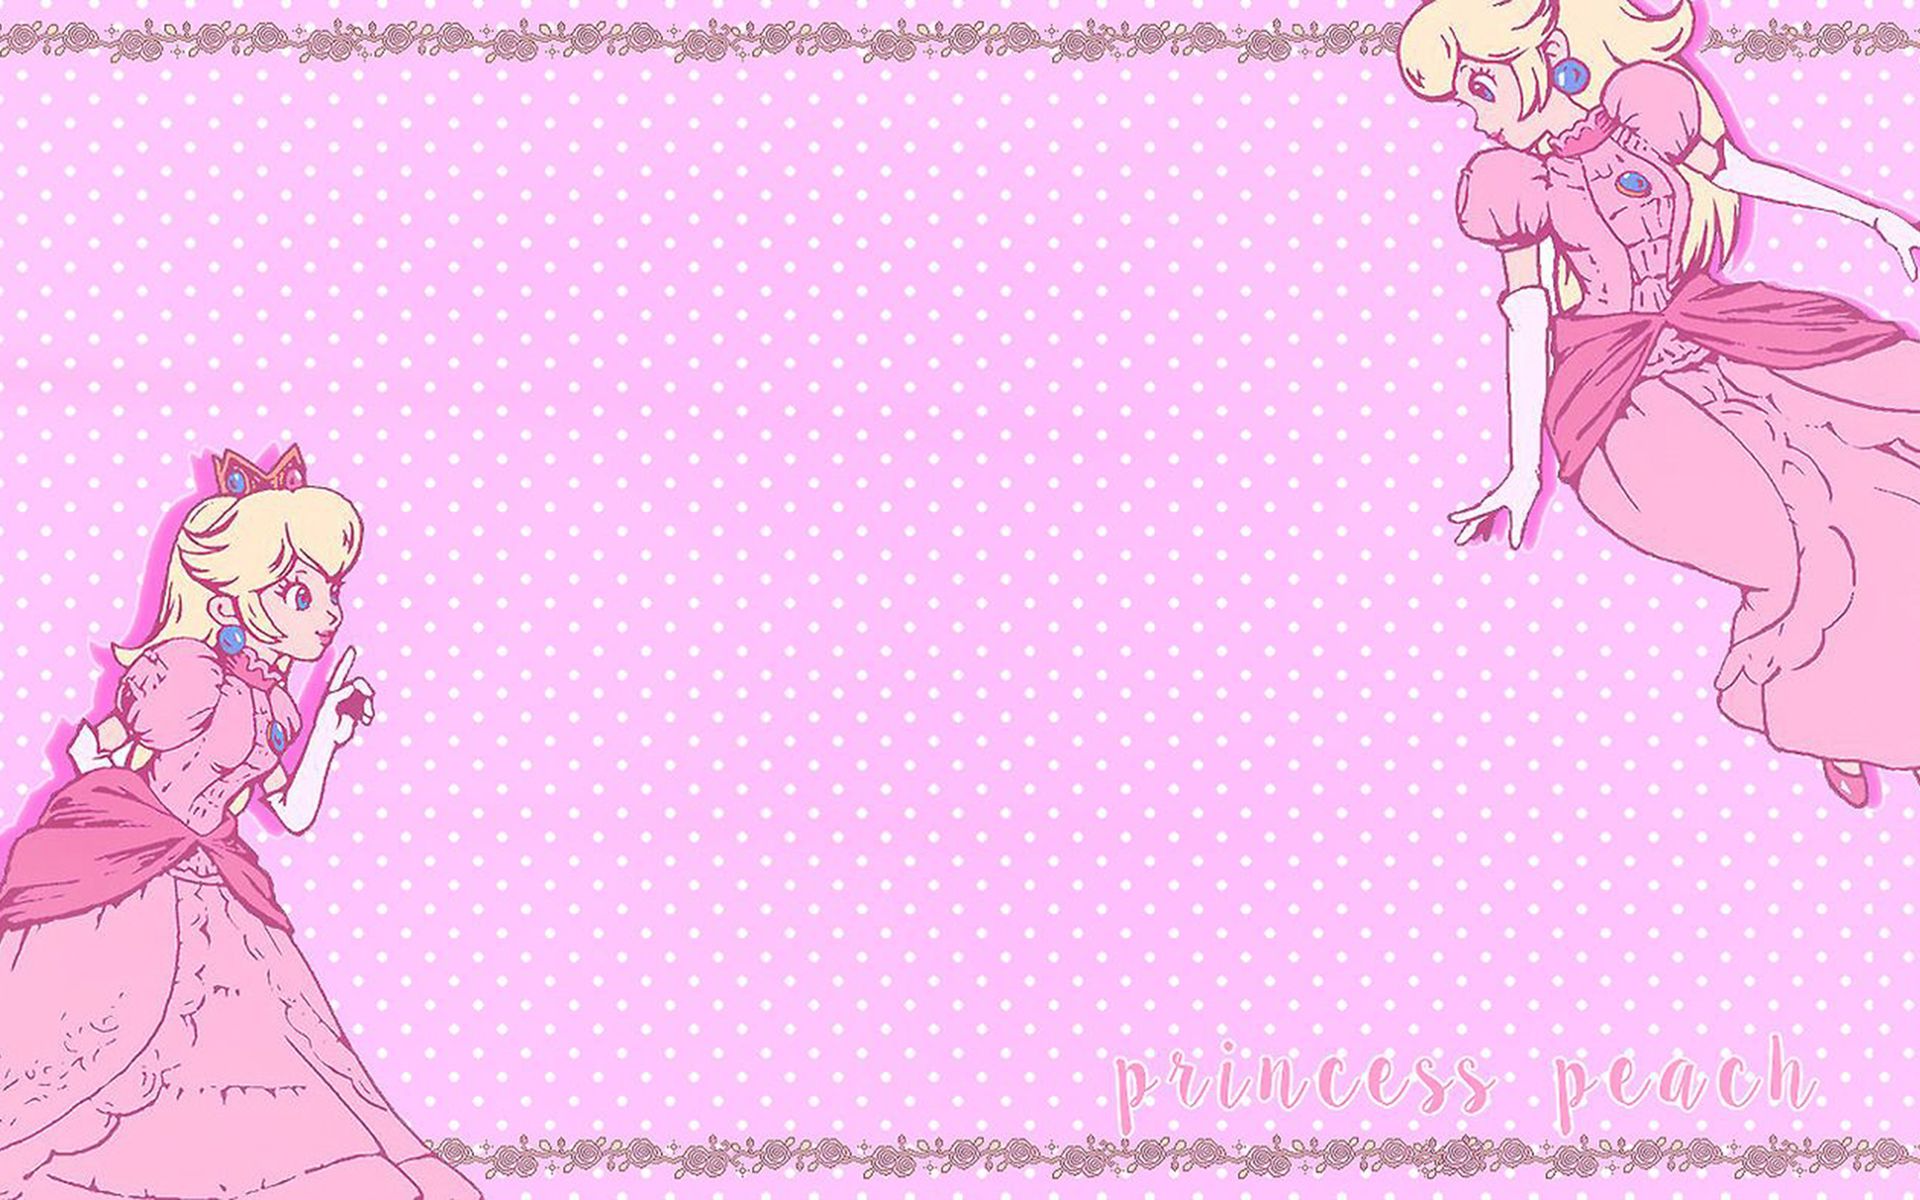 Two princesses in pink dress are on a wallpaper - Princess, Princess Peach